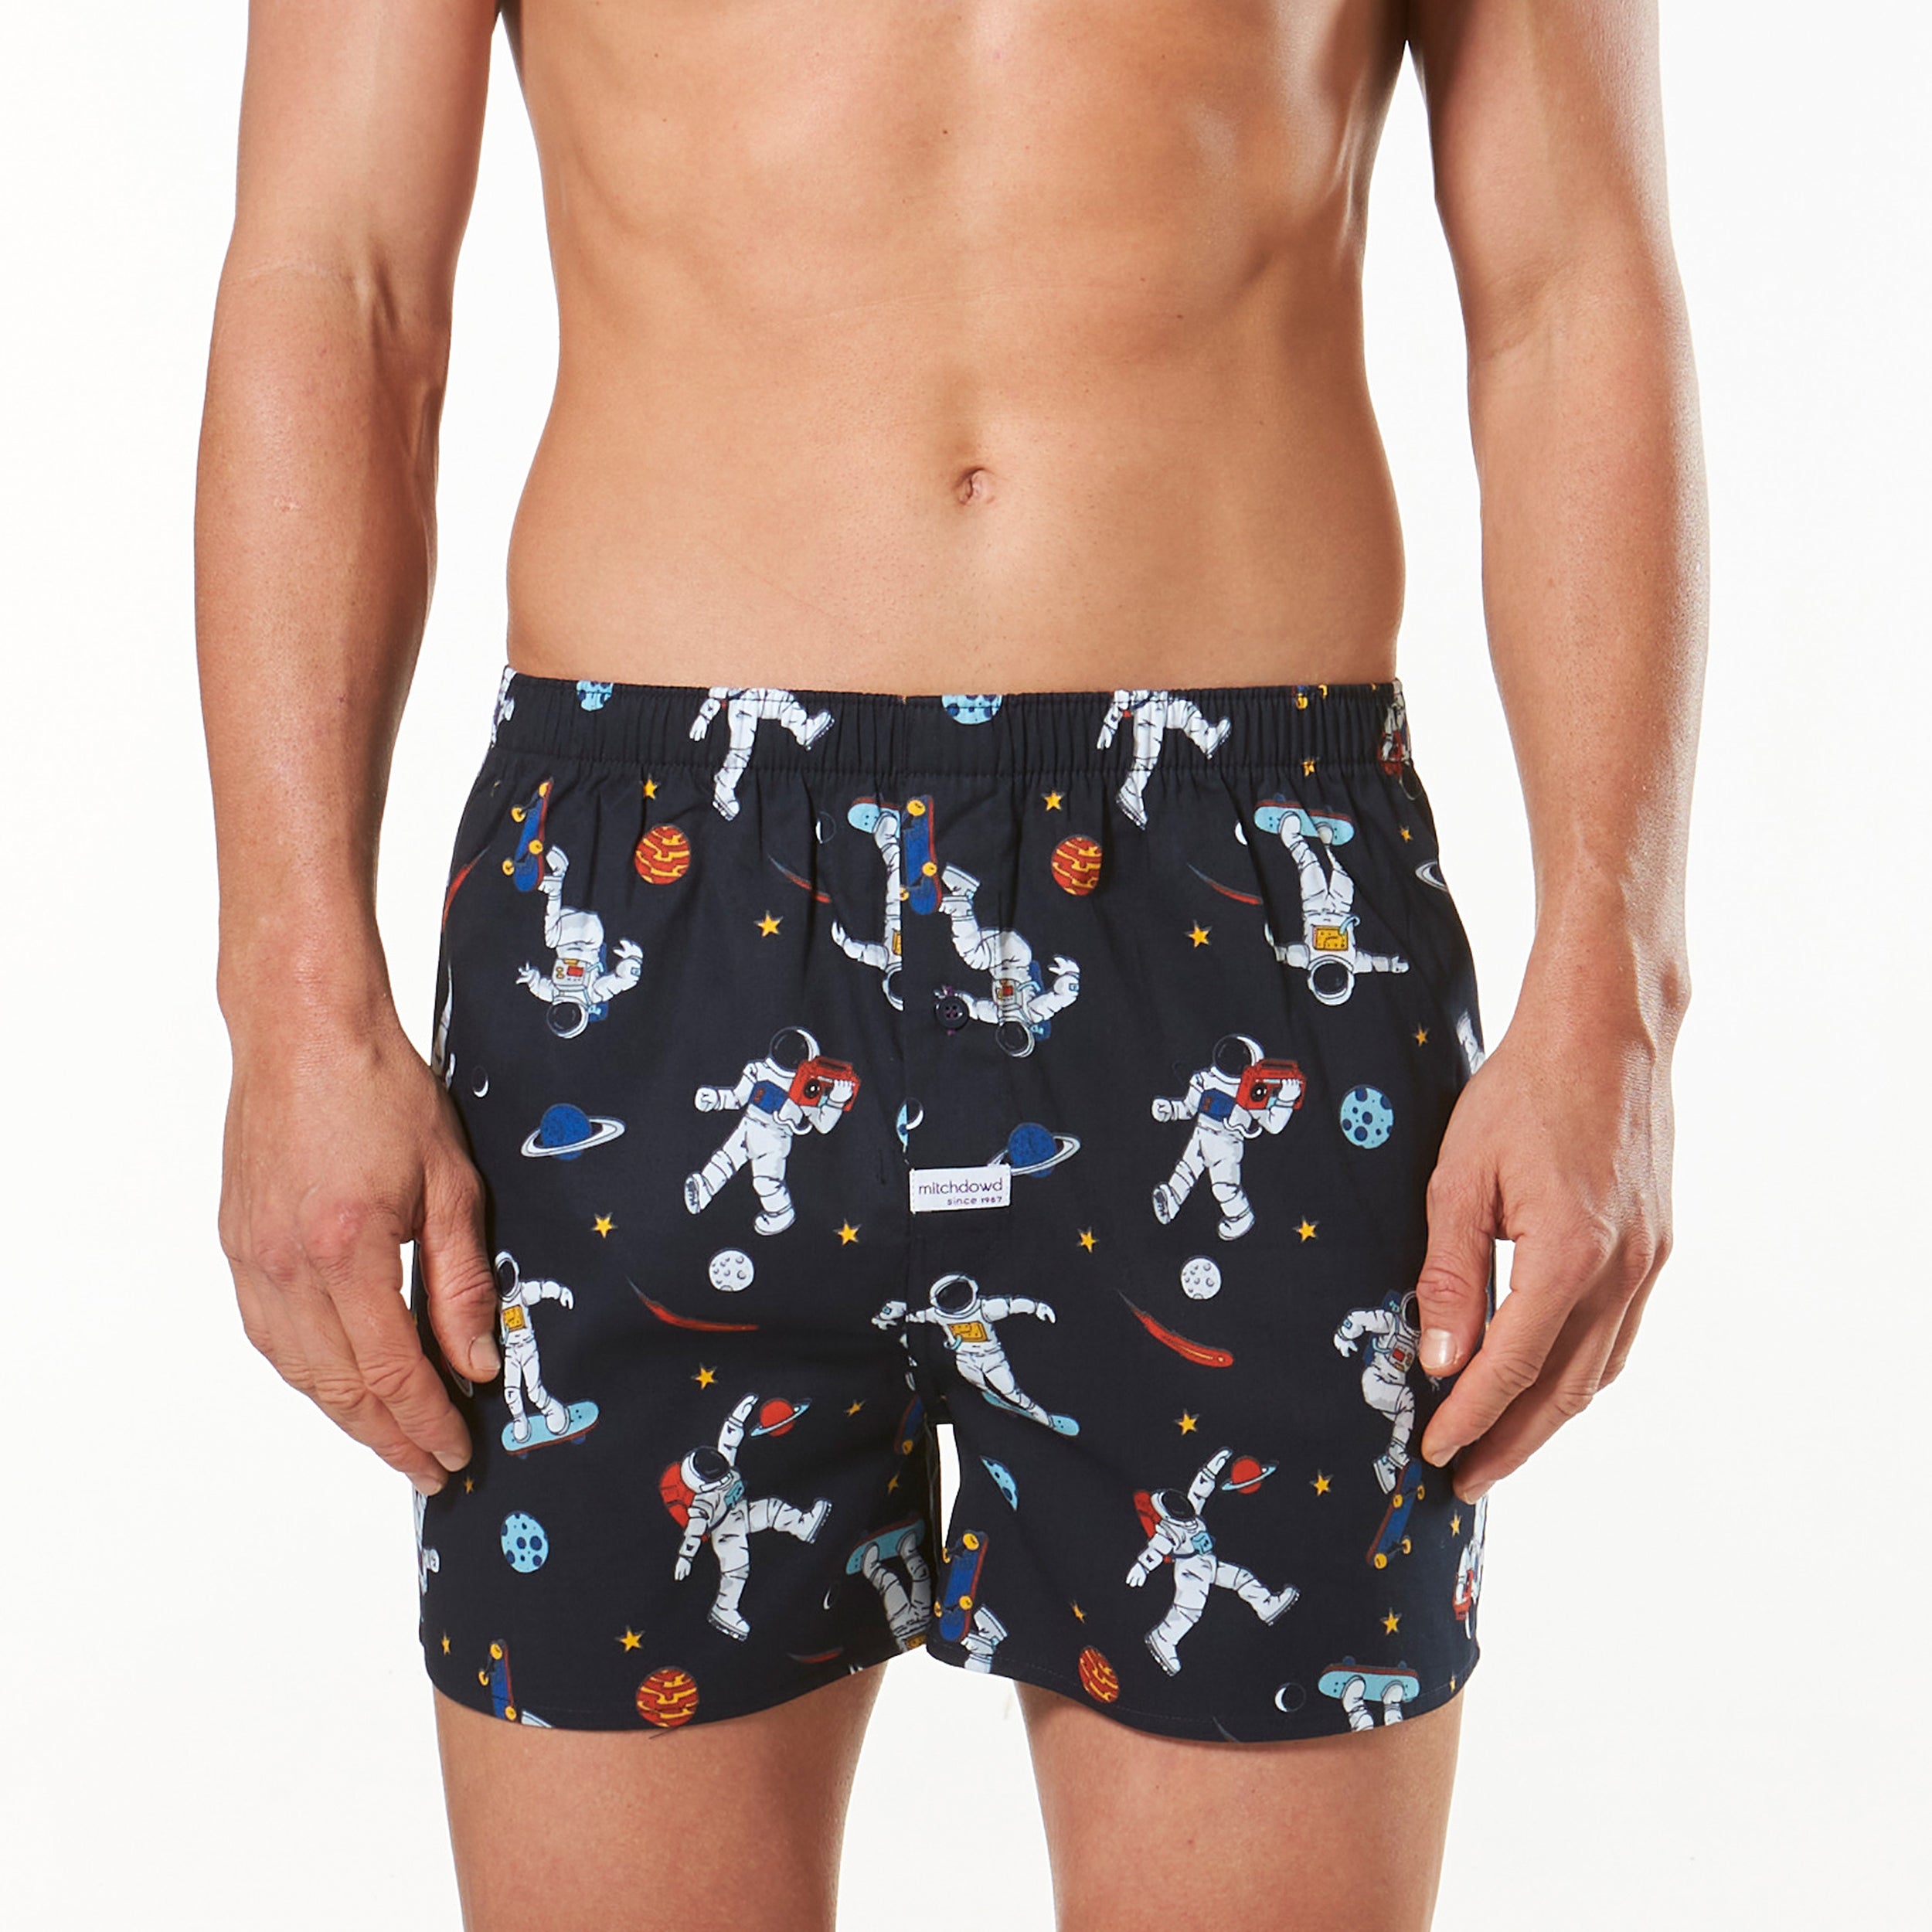 Men's Space Sports Printed Boxers